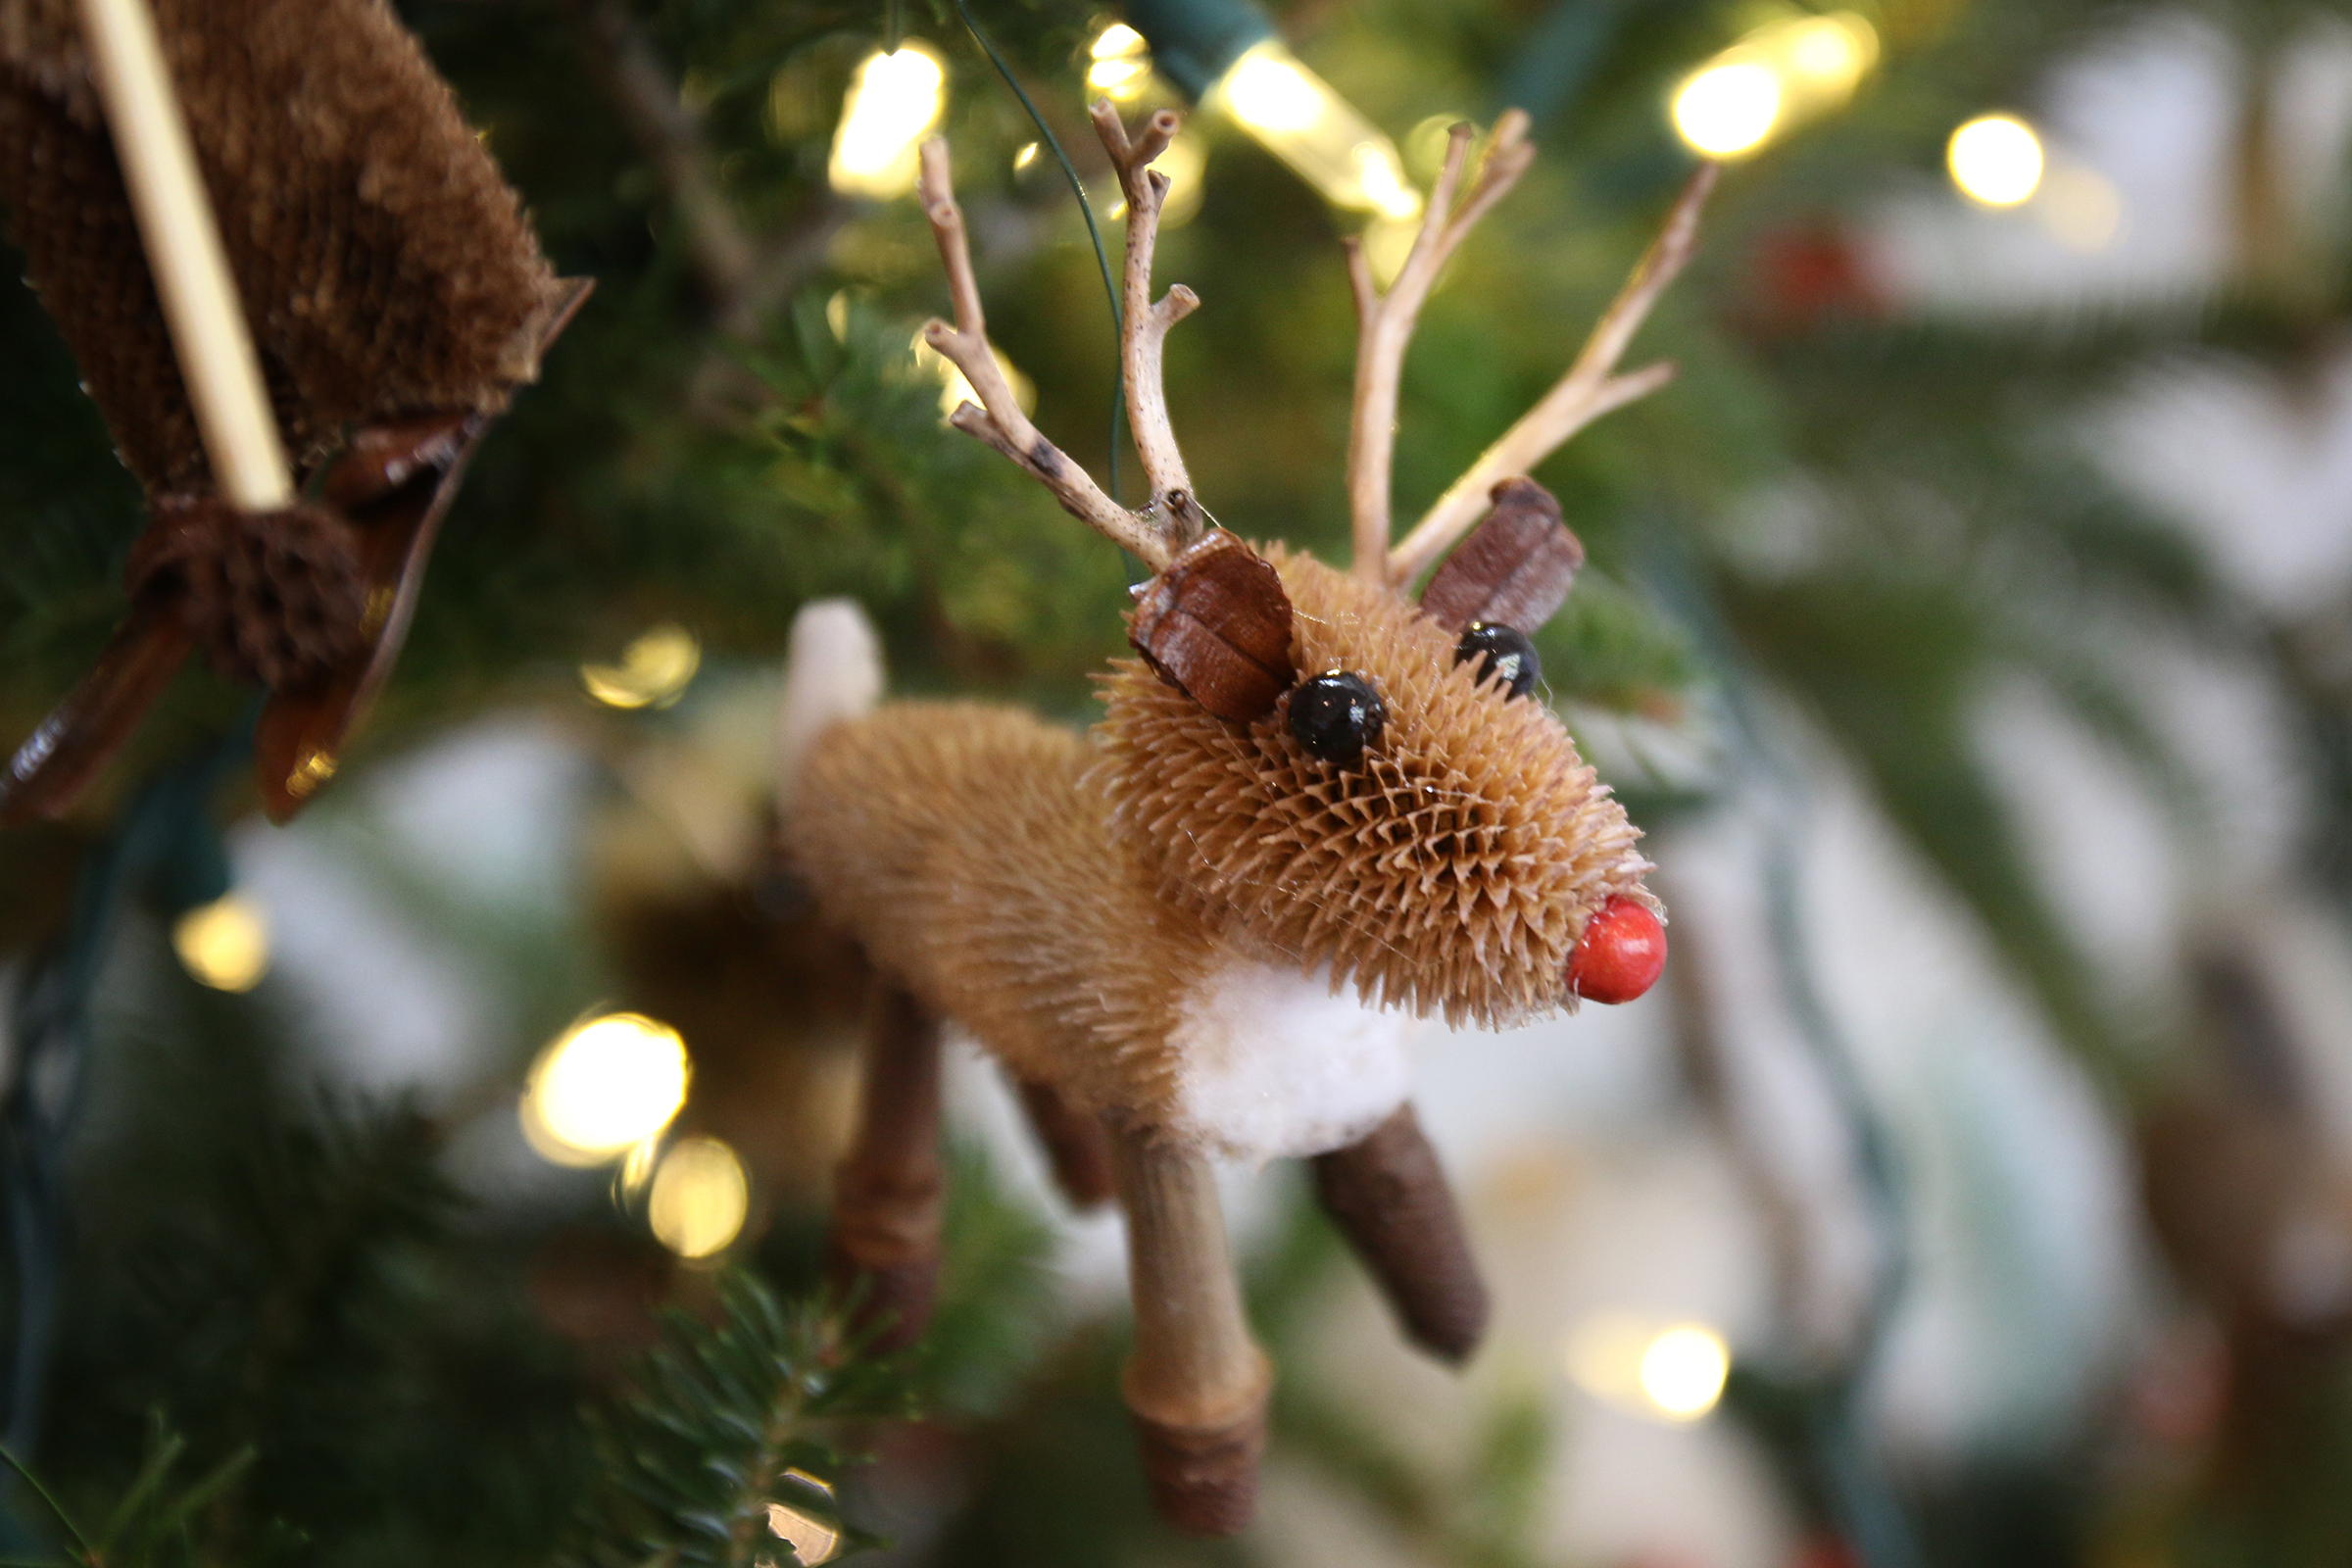 Brandywine Critter Ornament "Reindeer" made out of teasel.